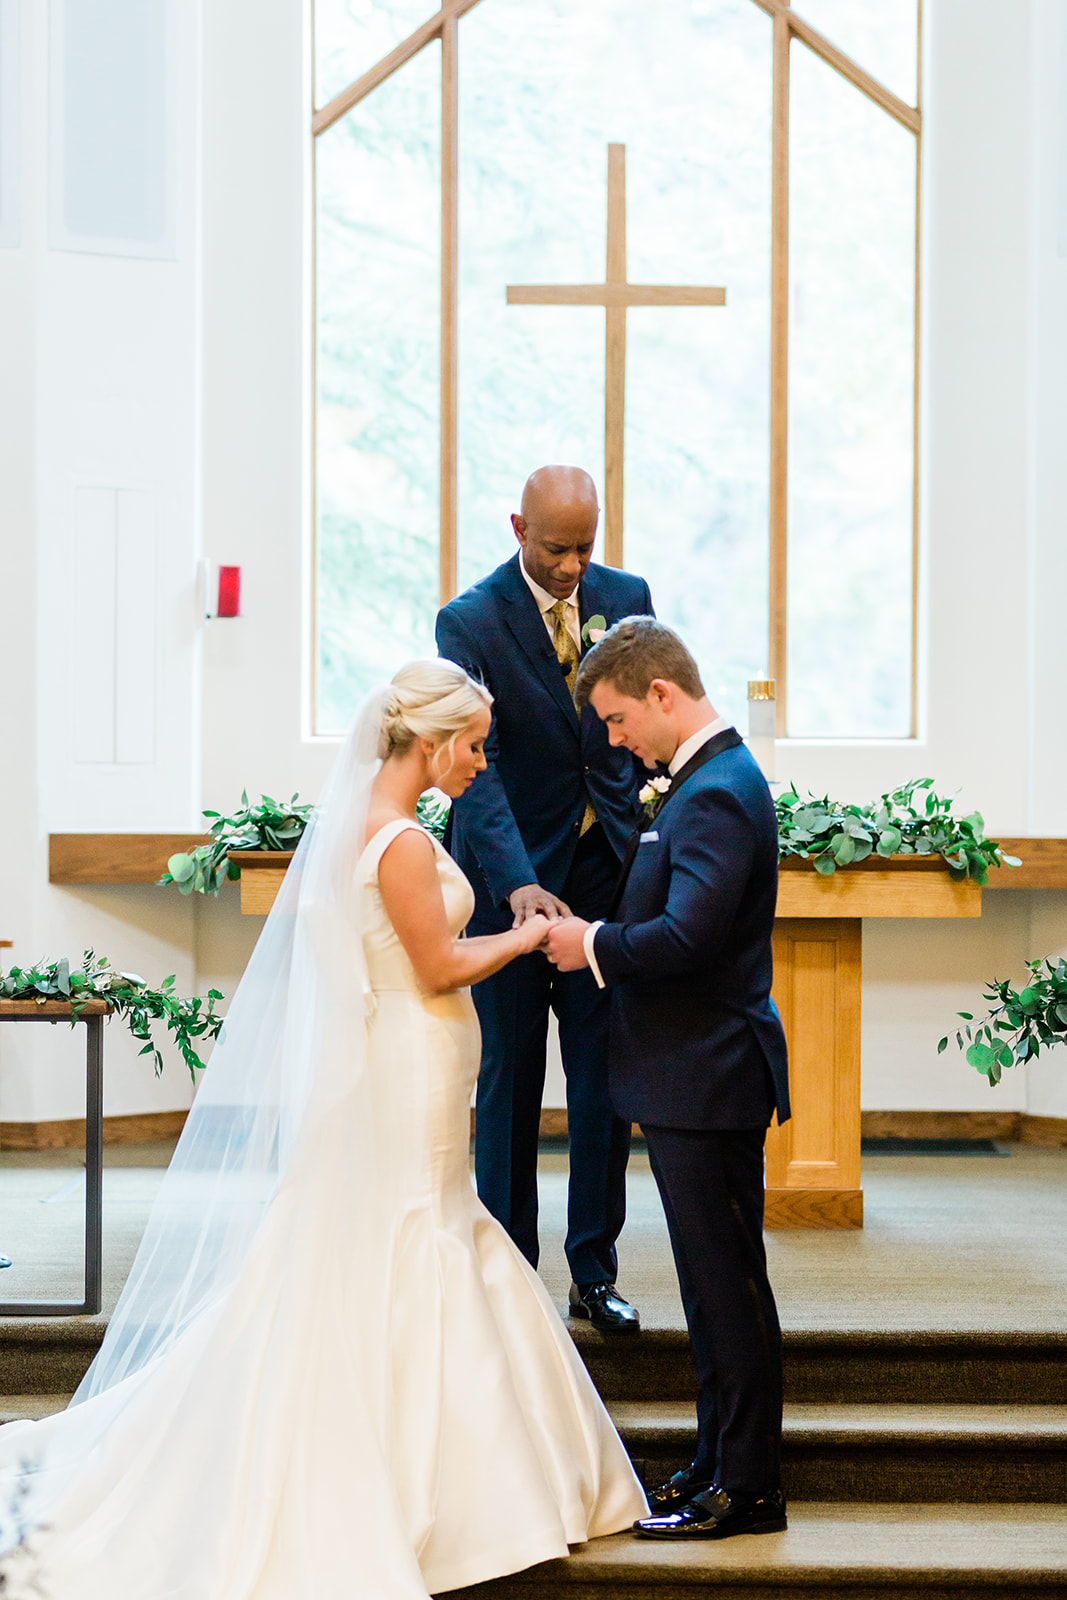 officiant blesses bride and groom in Vail church during wedding ceremony